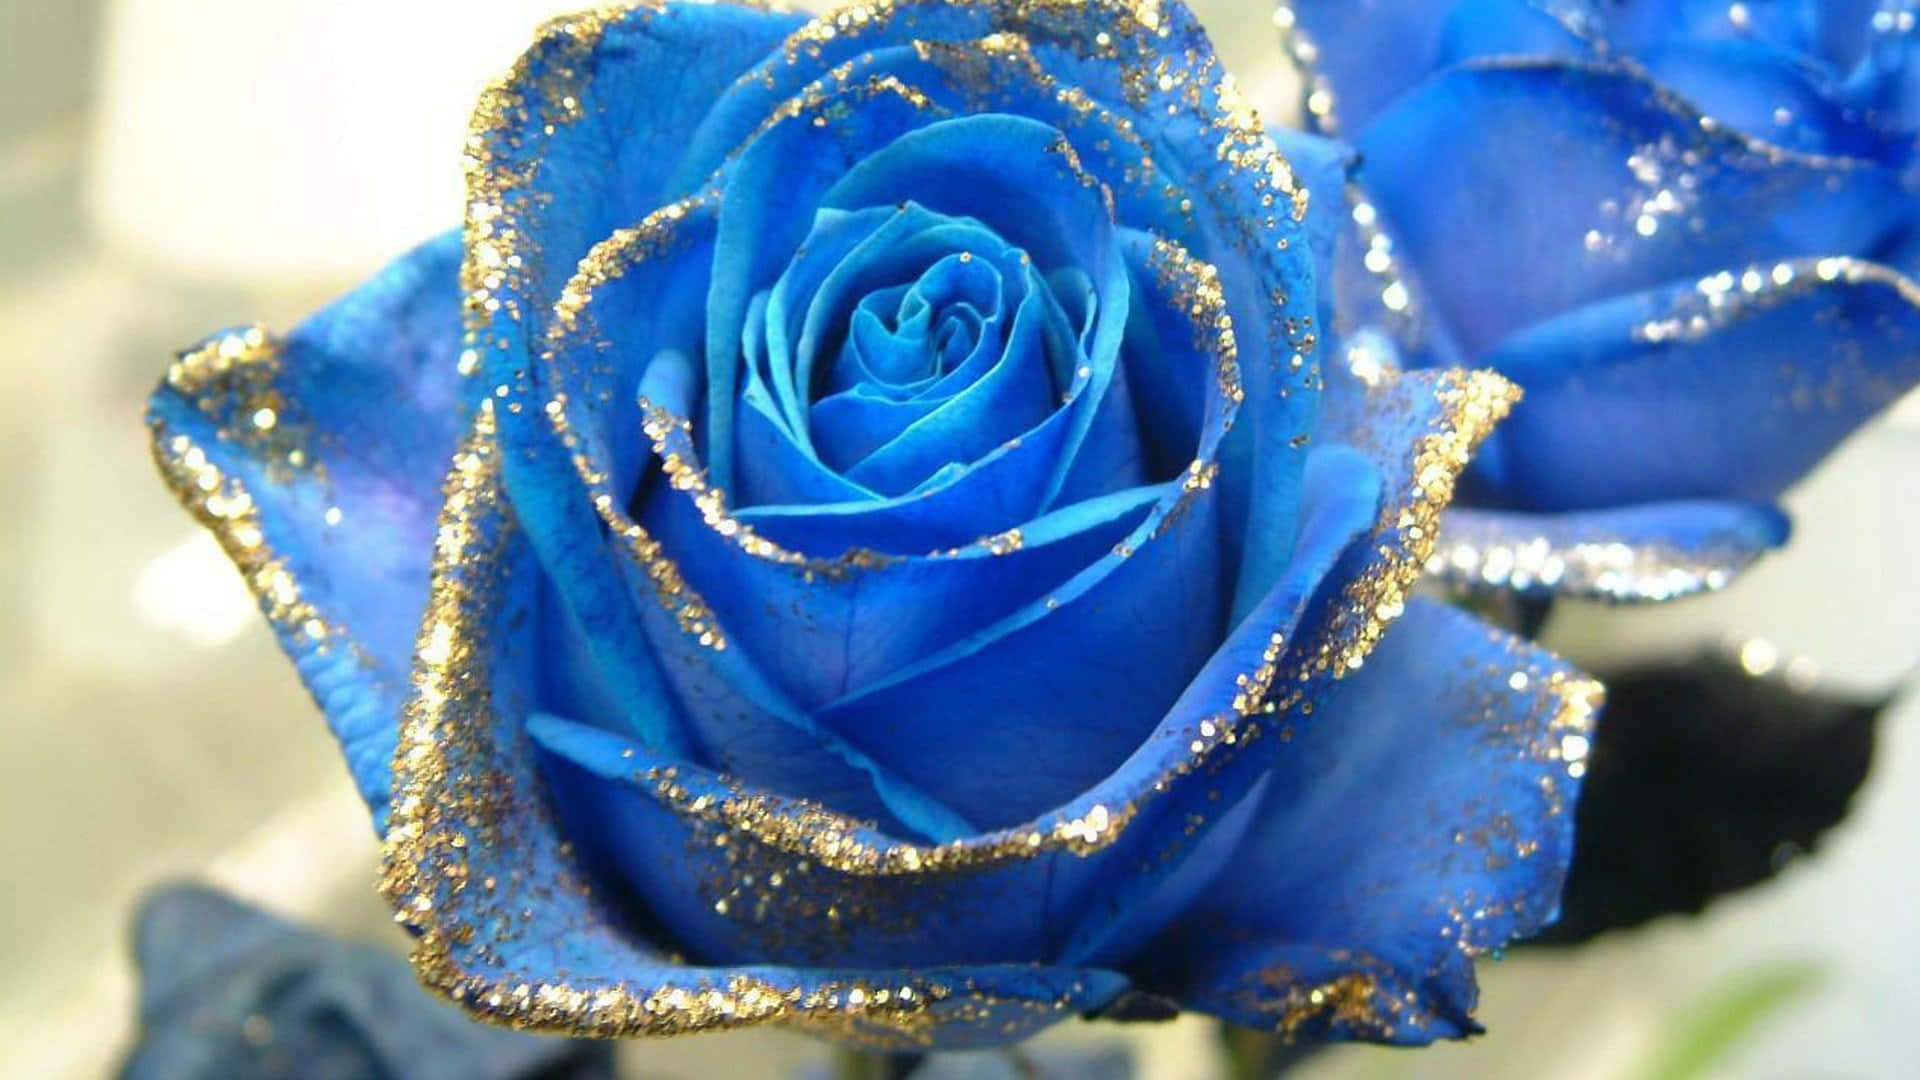 A gorgeous bouquet of delicate Blue Roses. Wallpaper